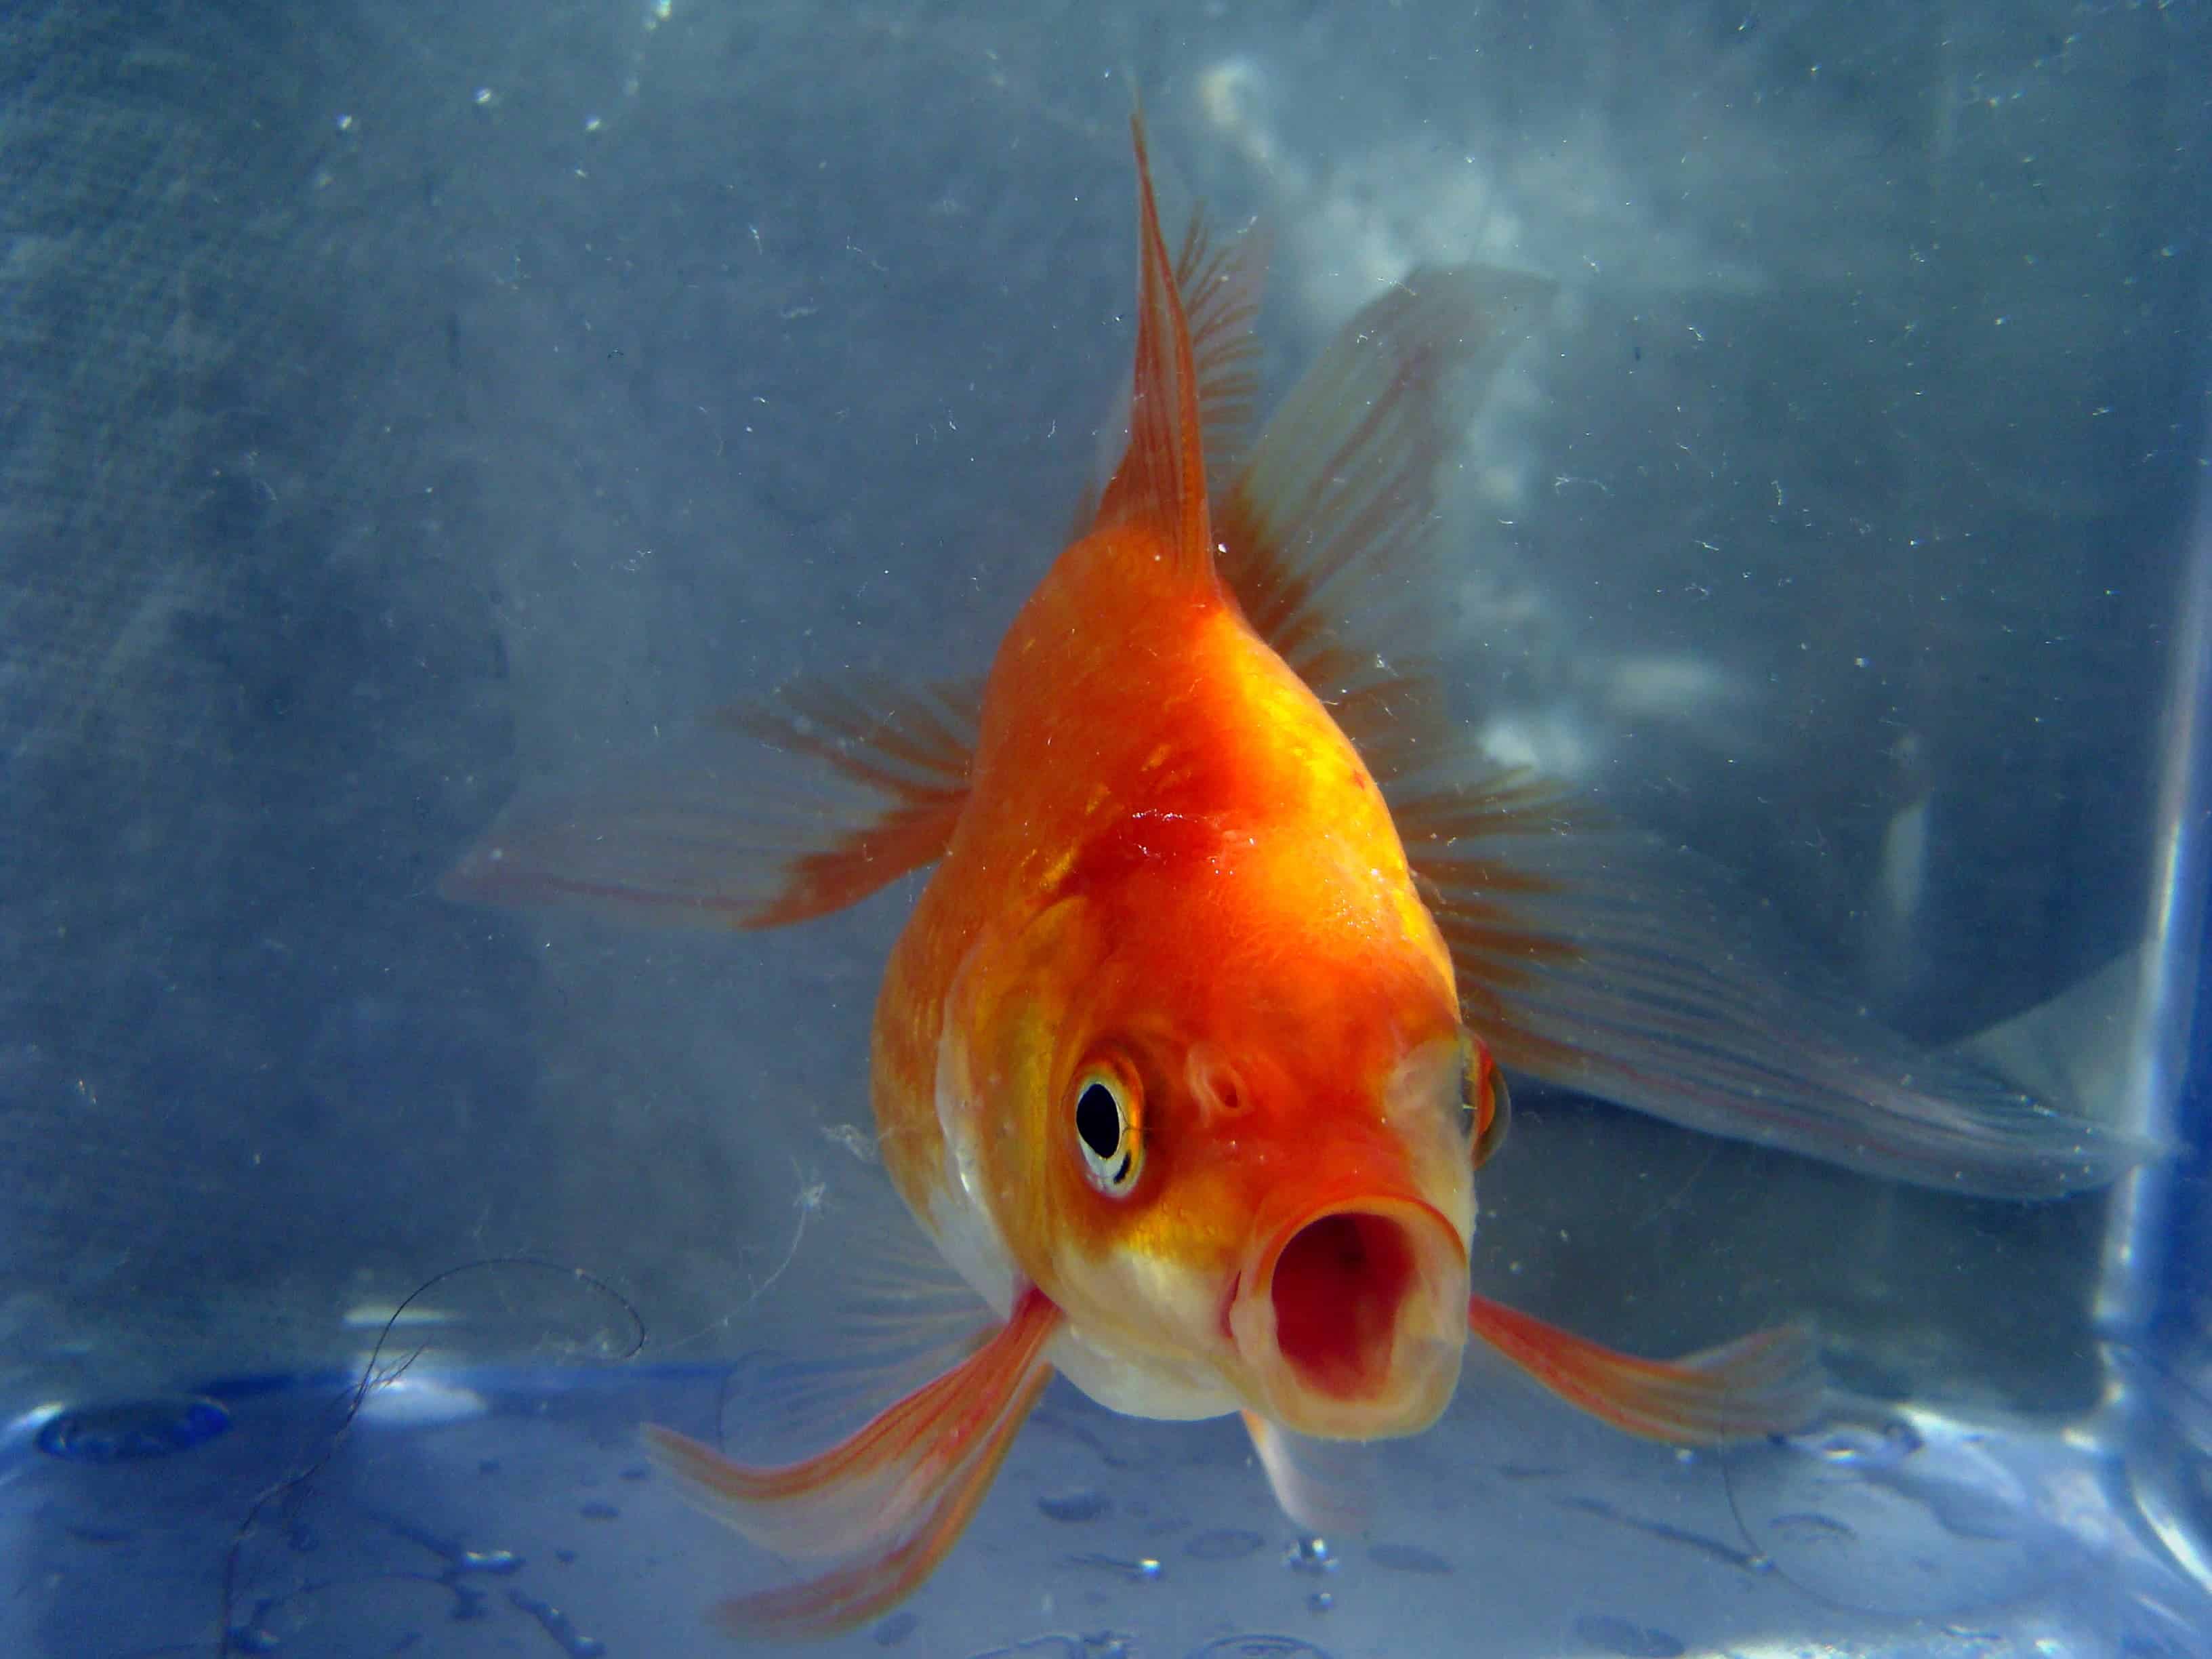 Goldfish can live without oxygen for 4-5 months. Image credits: Pogrebnoj-Alexandroff.